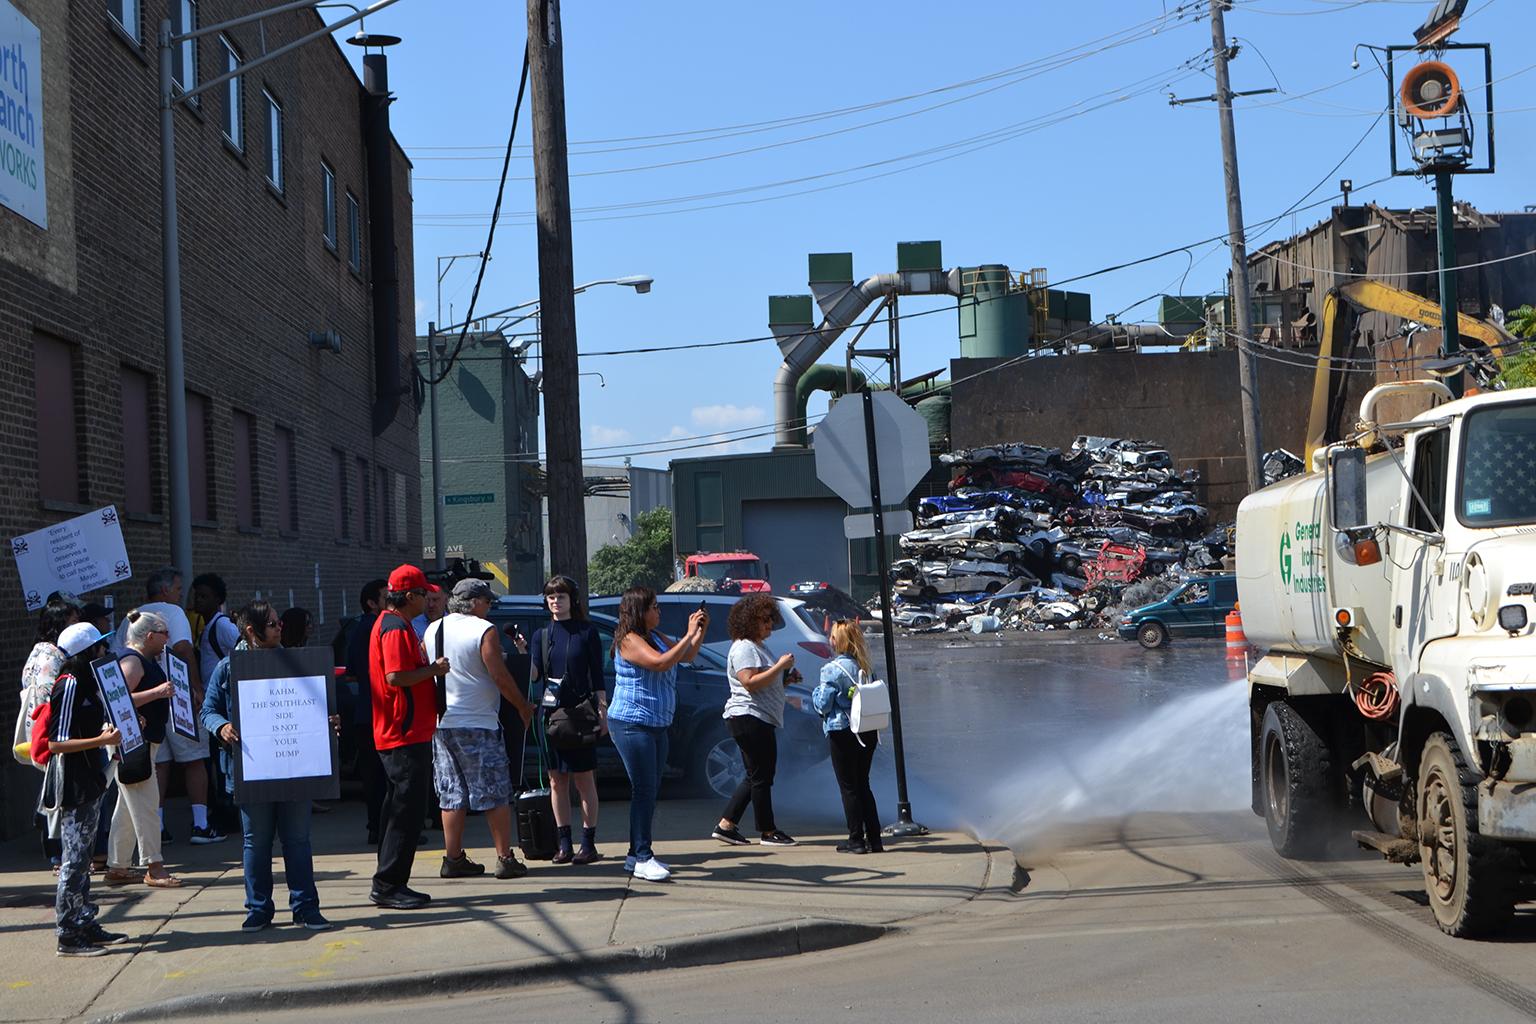 A water-spraying truck operated by General Iron drives past protesters on Monday, July 30, 2018. (Alex Ruppenthal / Chicago Tonight)